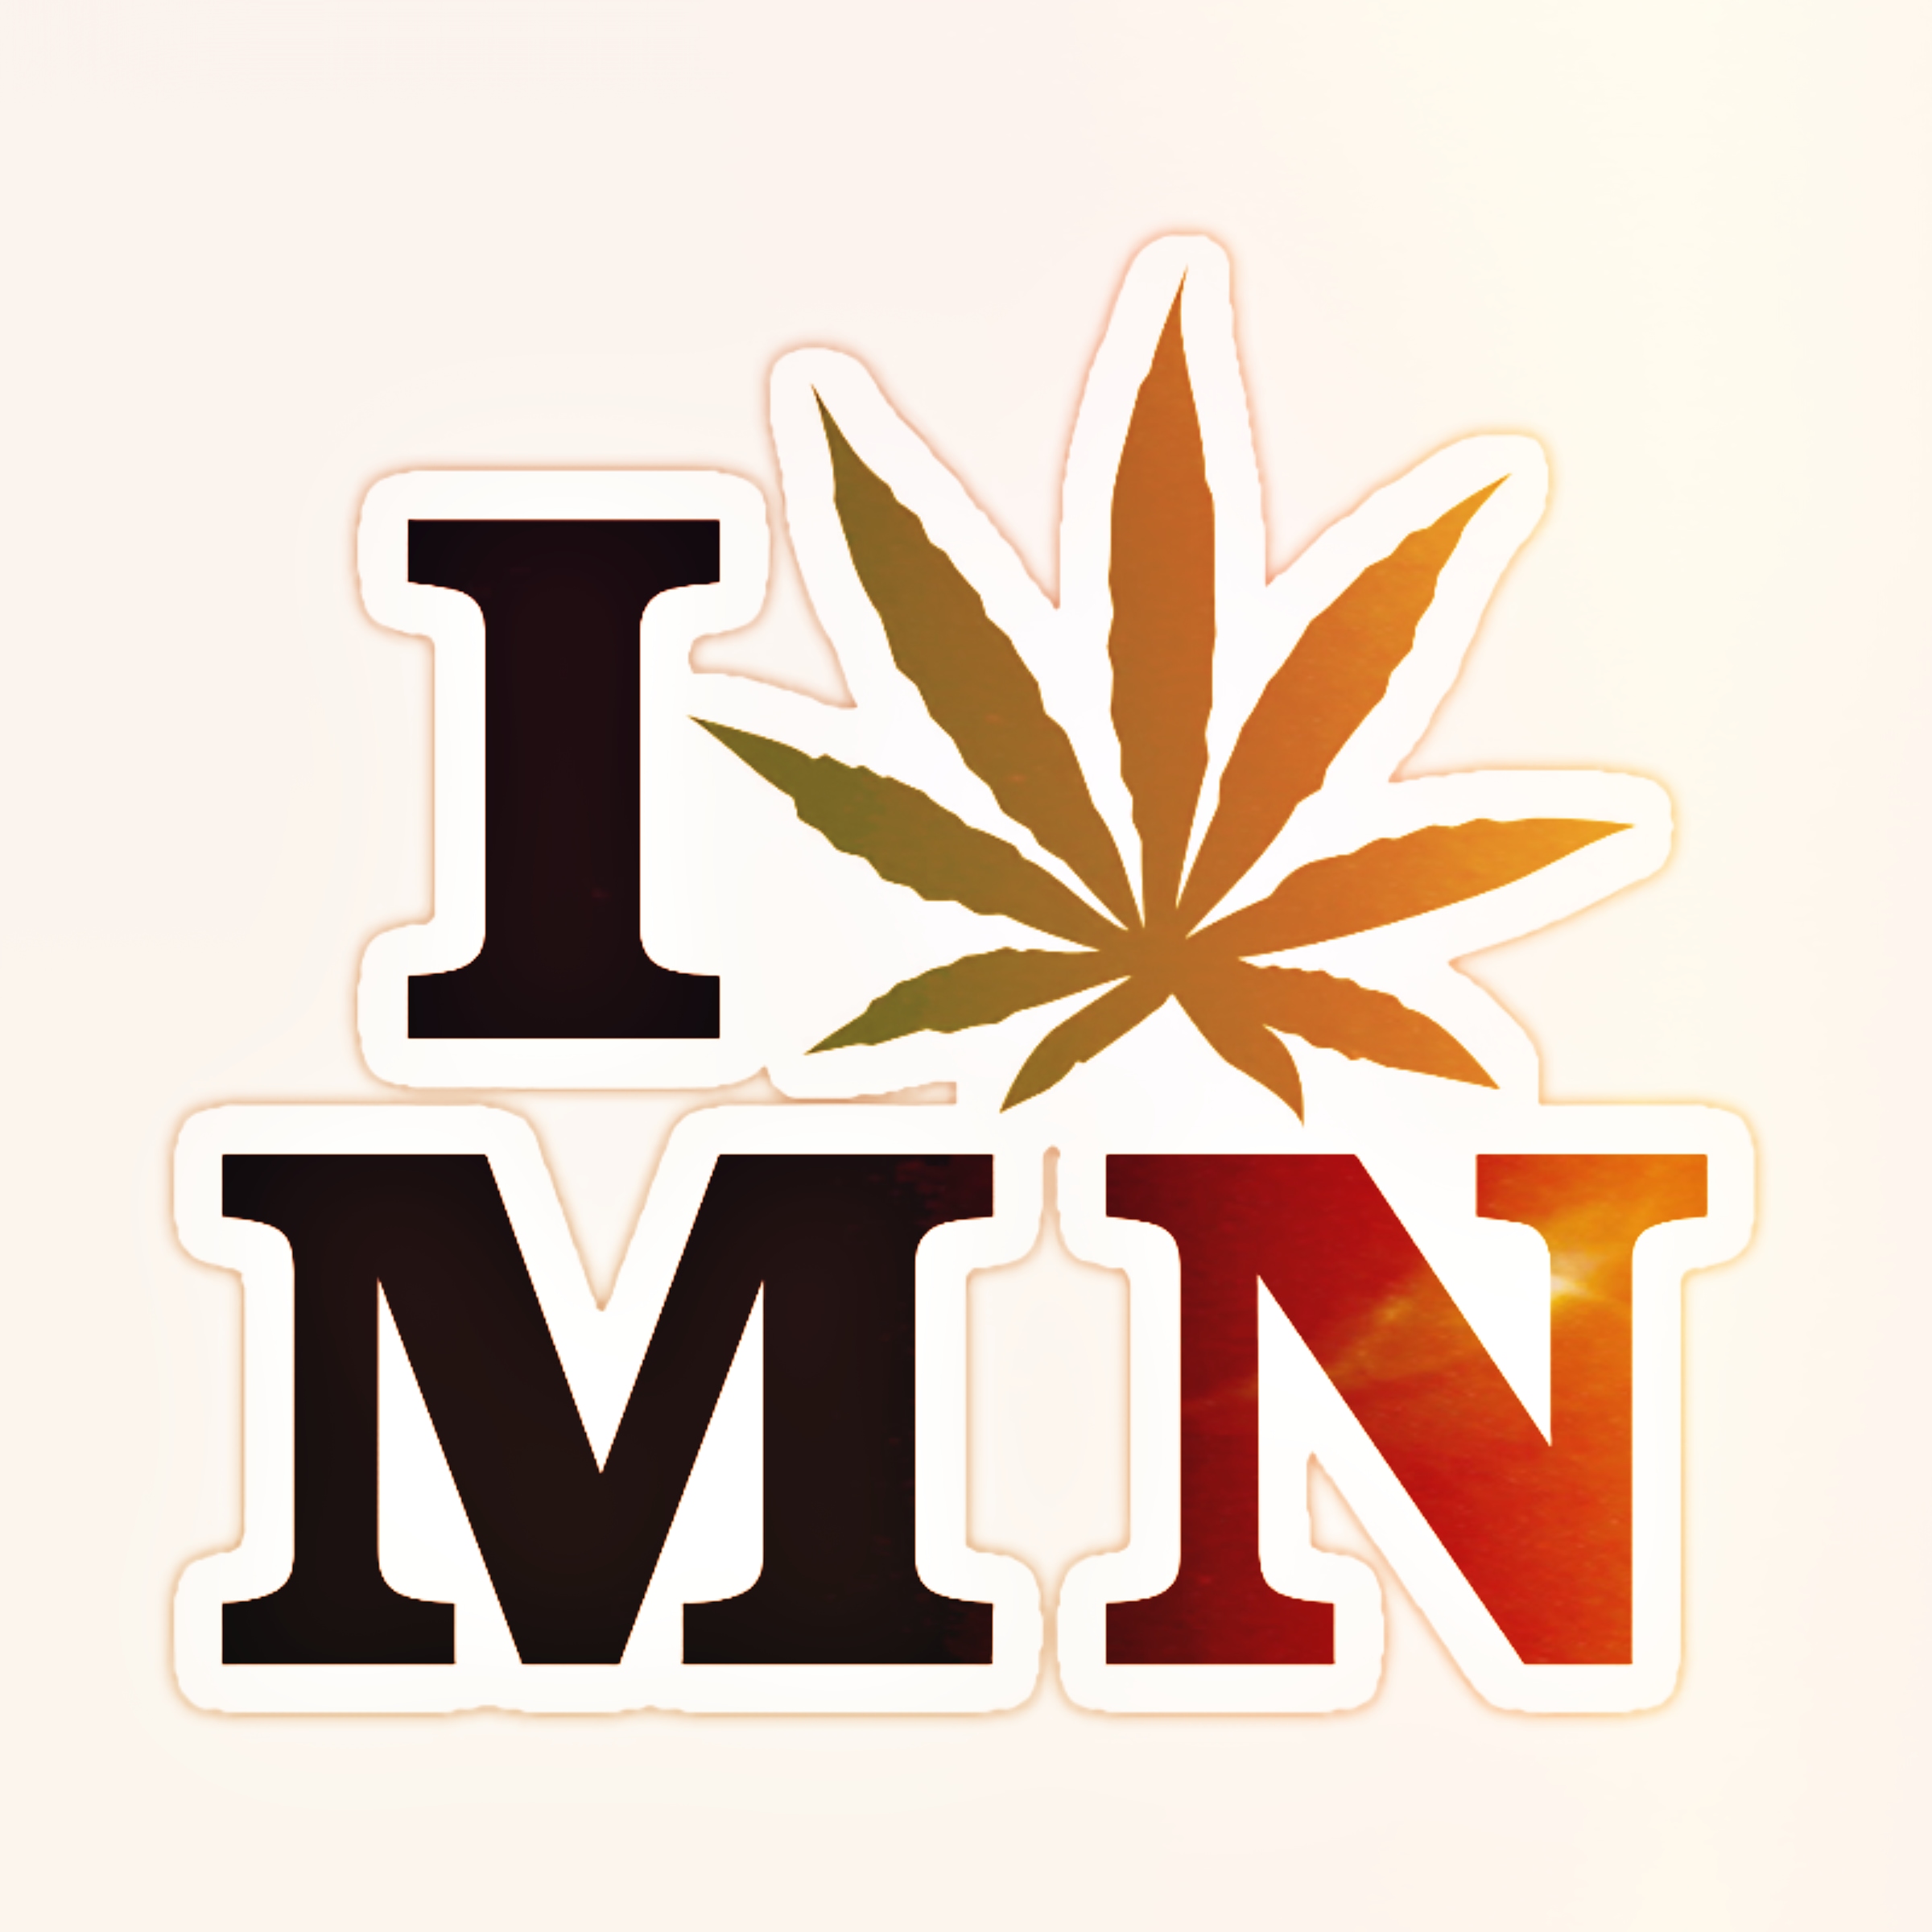 Minnesota is the 23rd state to legalize weed – and it’s going great